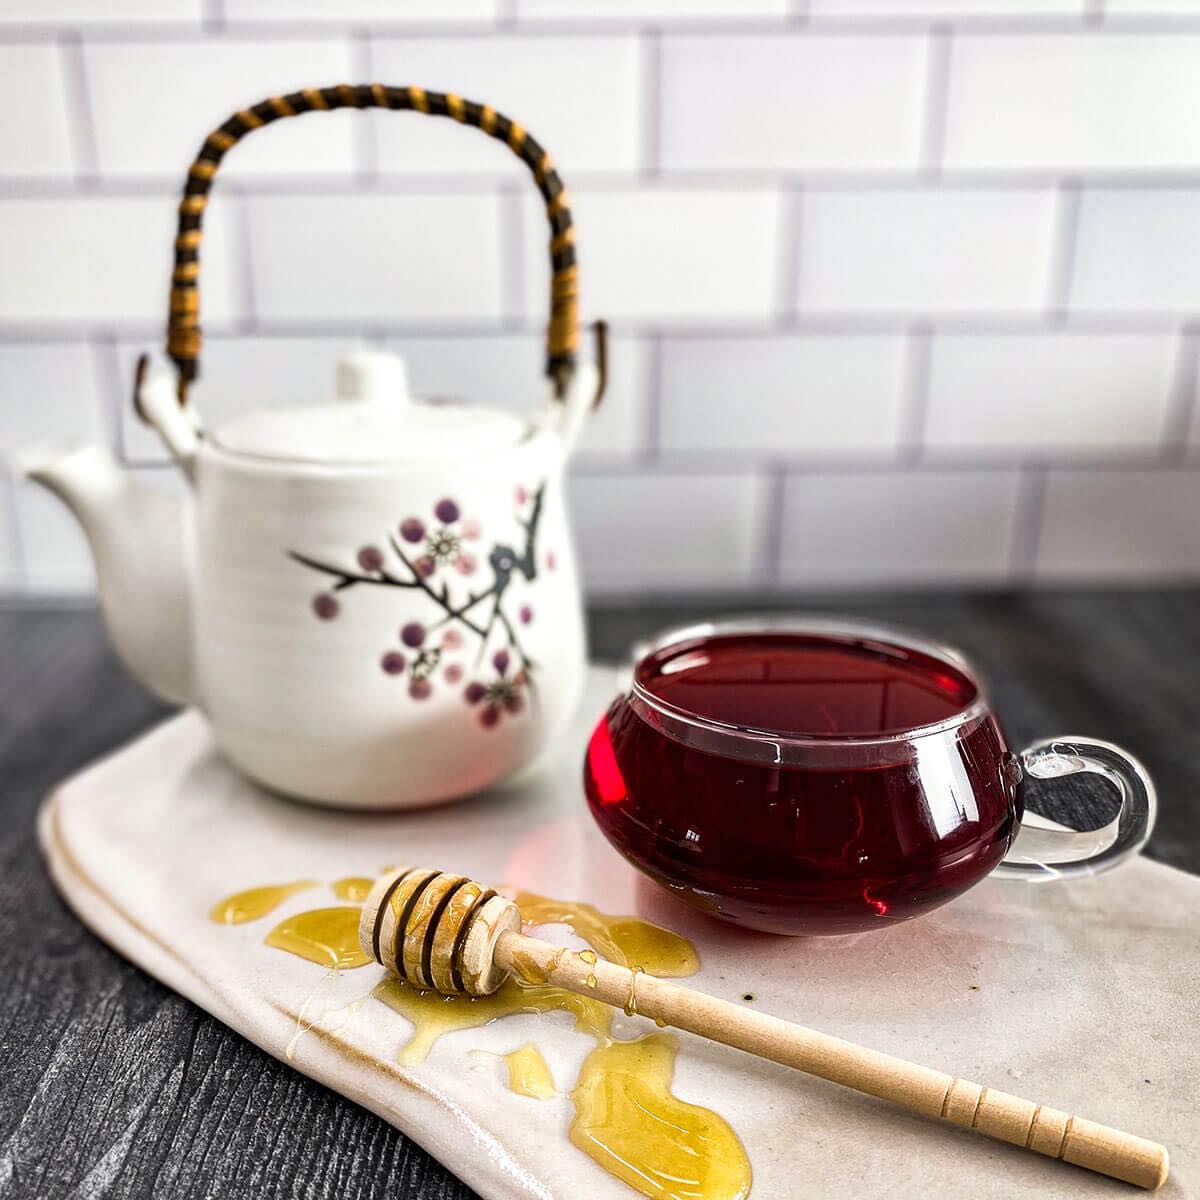 Brewed Hibiscus Orange Delight Tea in a clear glass mug with a white tea pot and honey wand in the background.